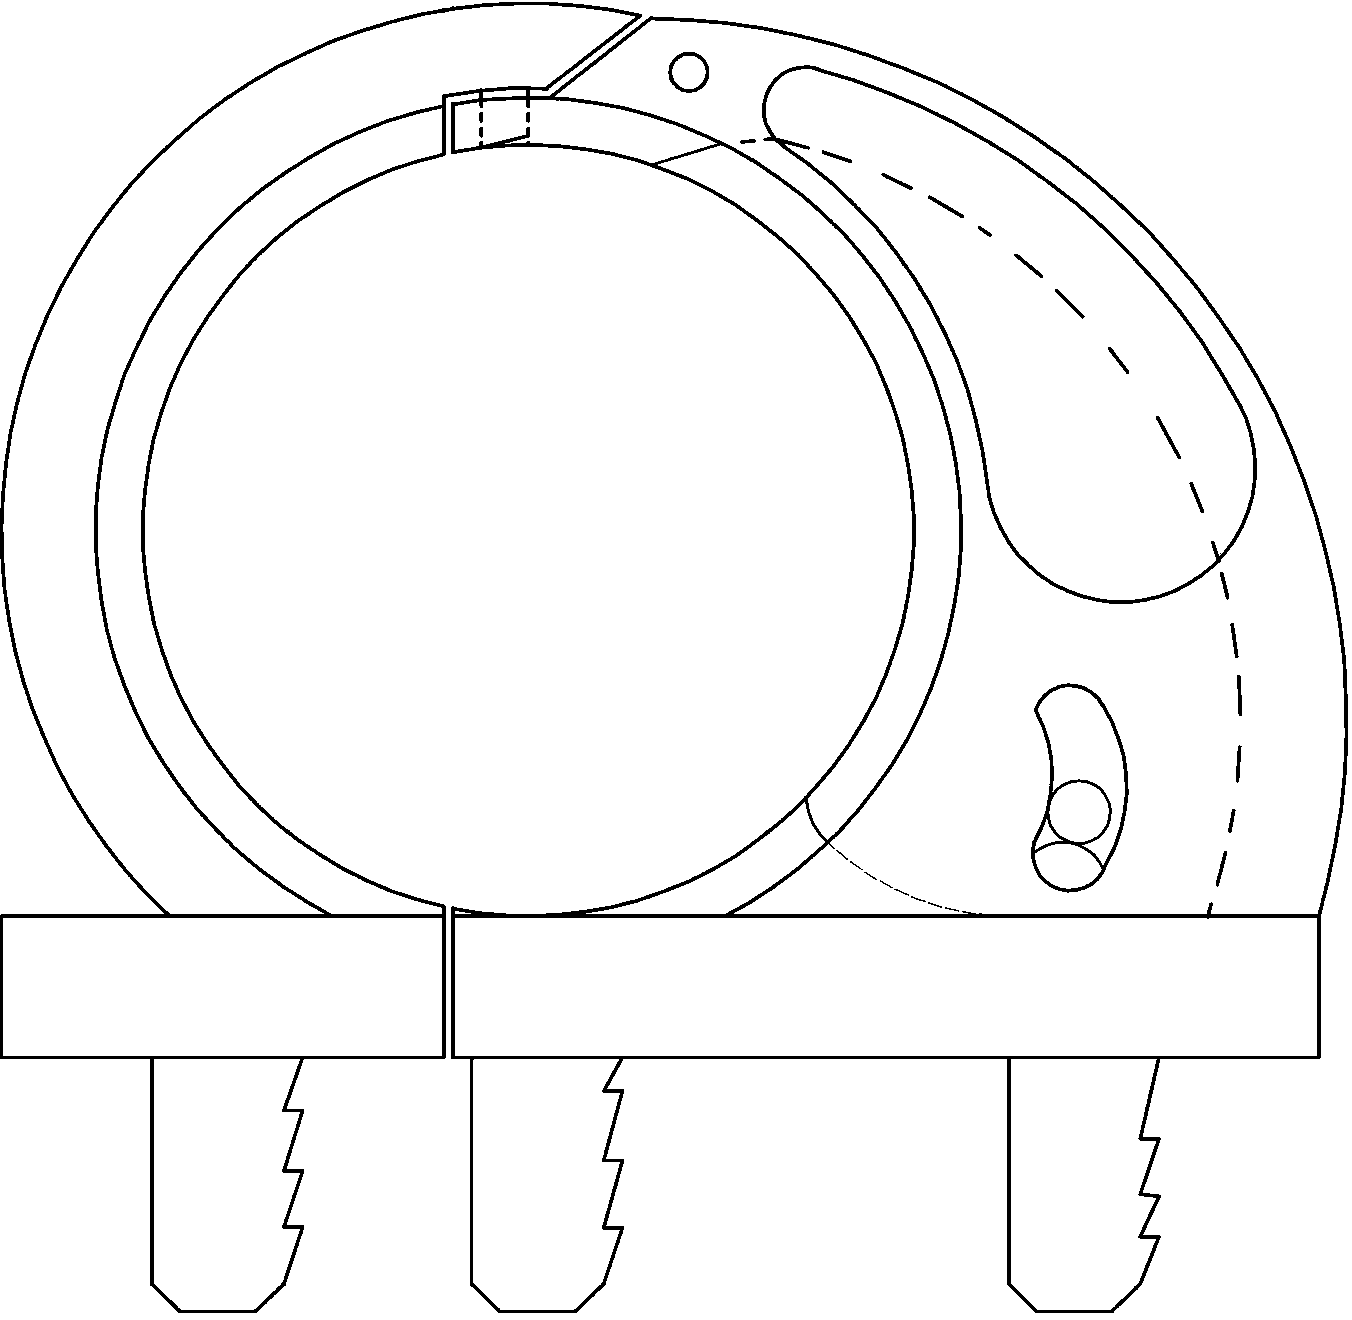 Locking combined hook ring